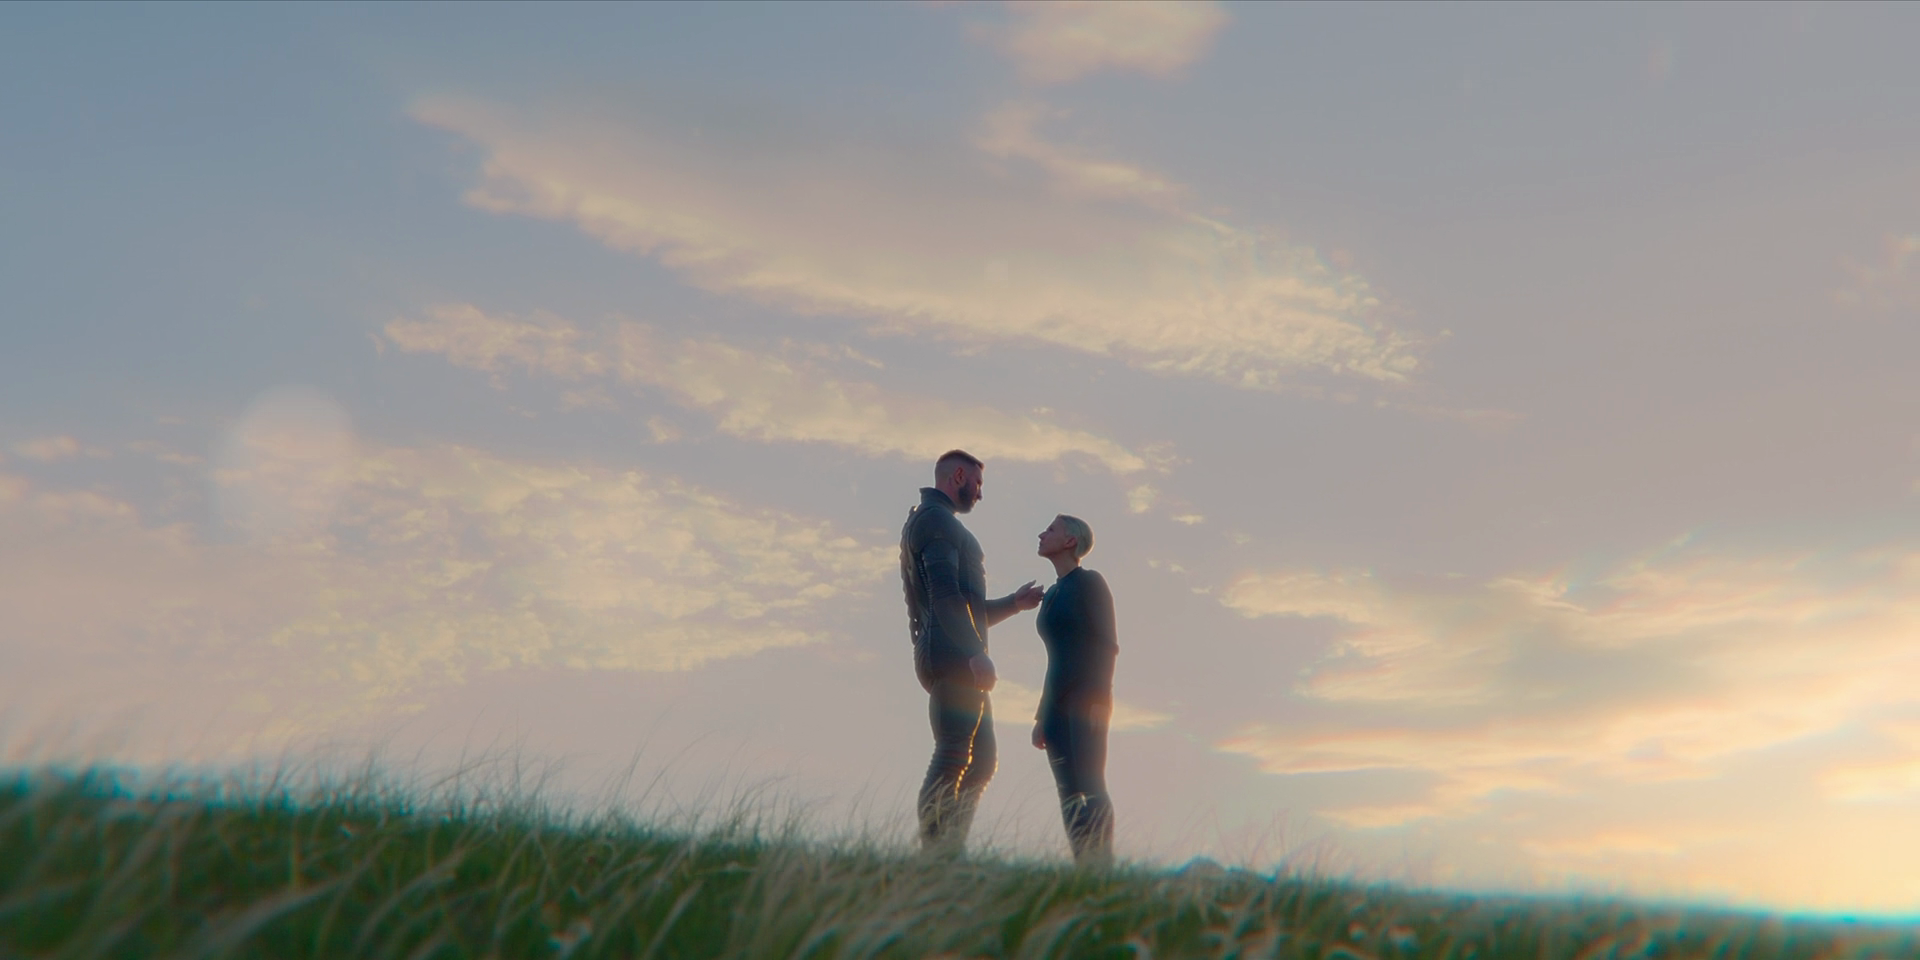 The Master Chief and Makee stand facing each other in a grassy field in dusk-like light. The Master Chief is moving his hand to place it on Makee's cheek.